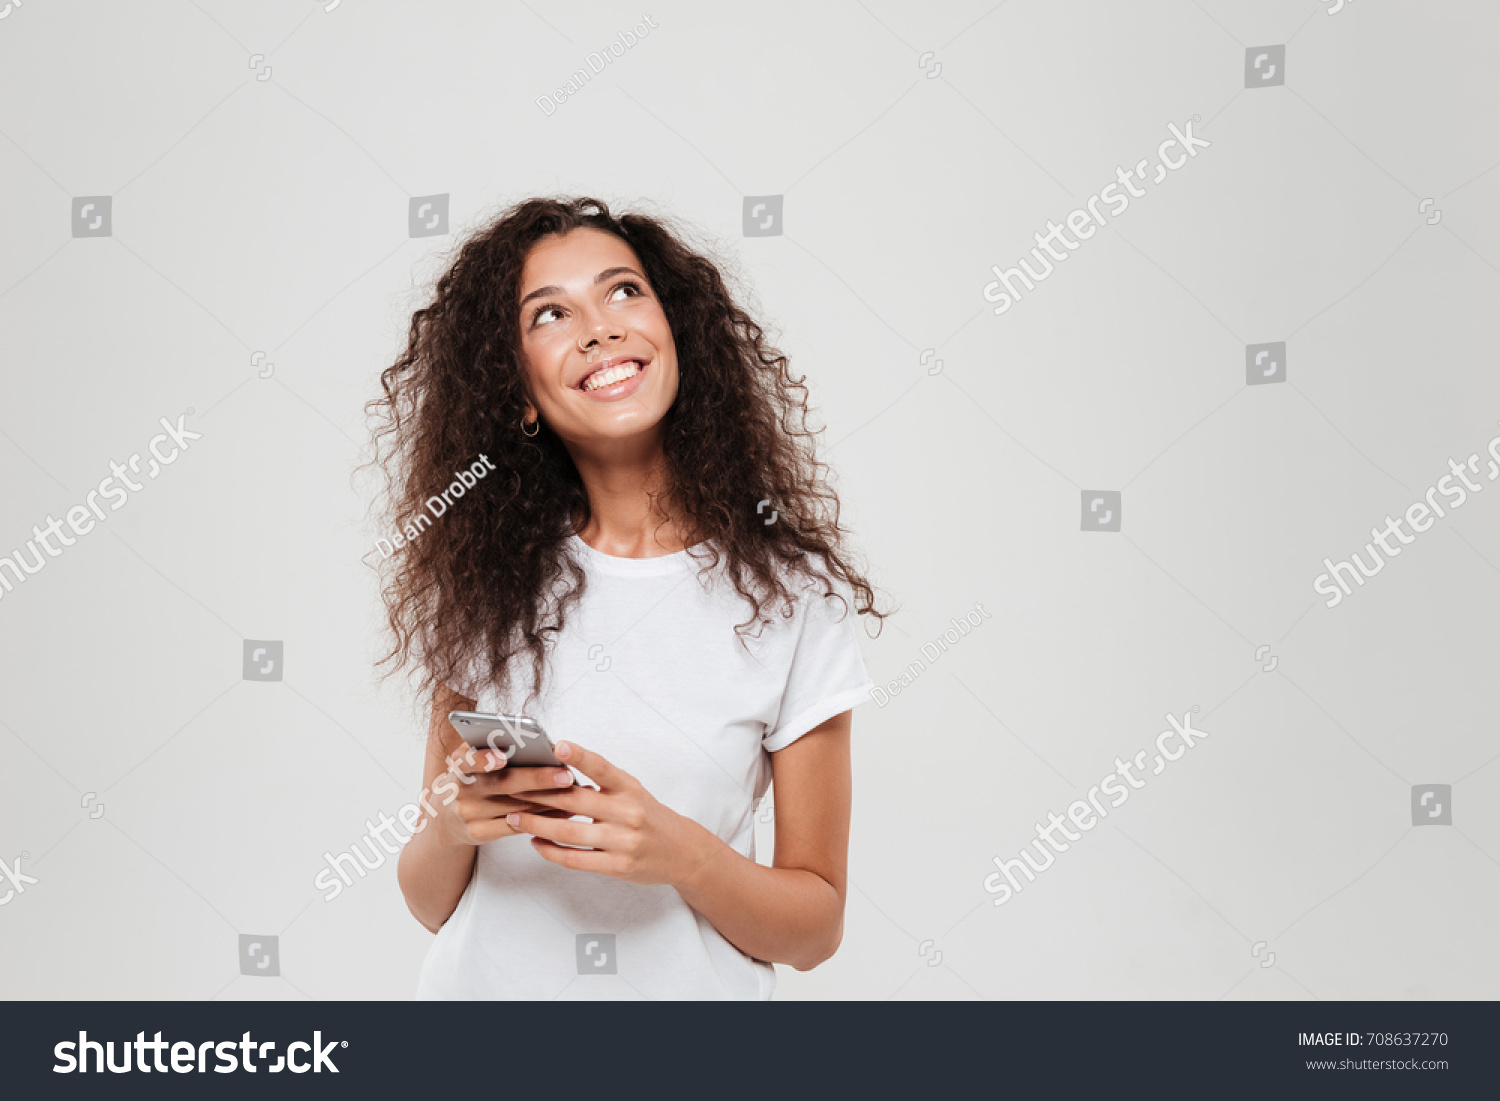 Smiling pensive woman holding smartphone in hands and looking up over gray background #708637270